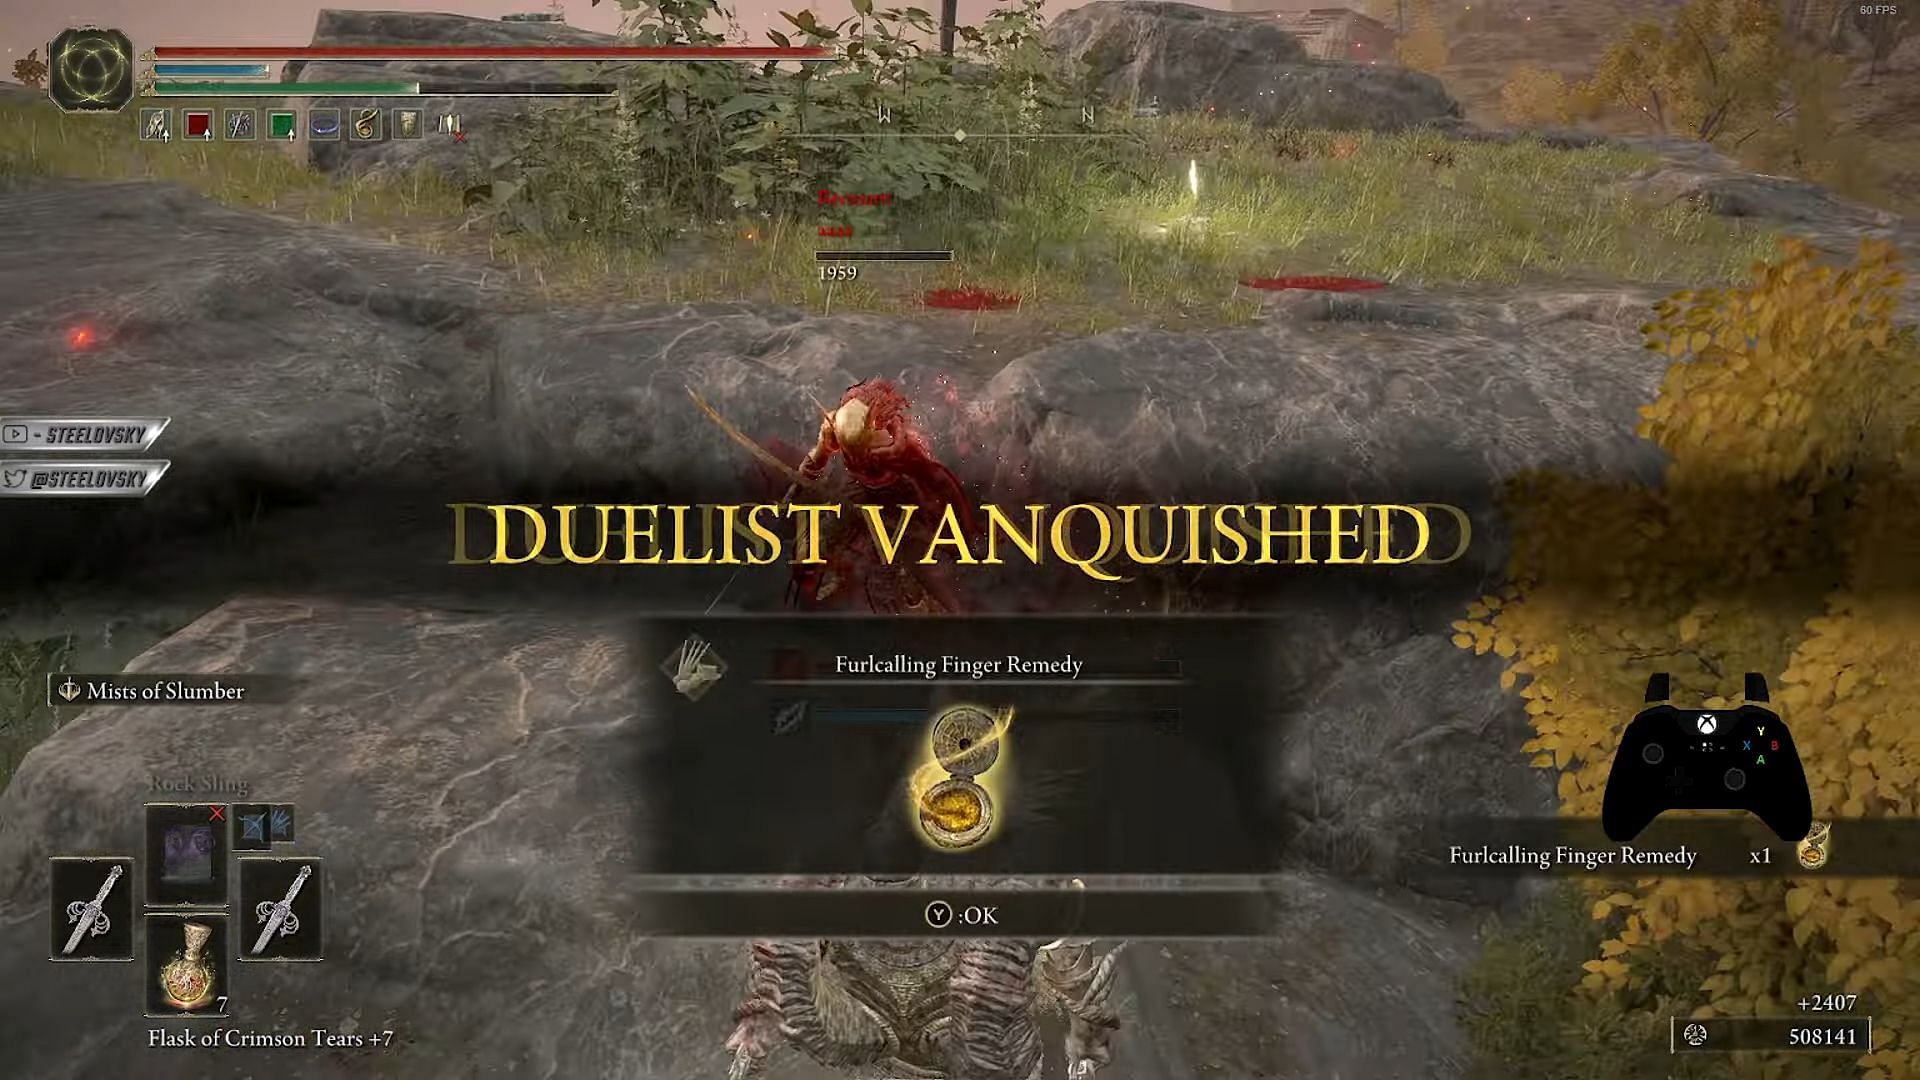 Sword of St. Trina is a gimmicky weapon good for PVP (Image via YouTube/Steelovsky)